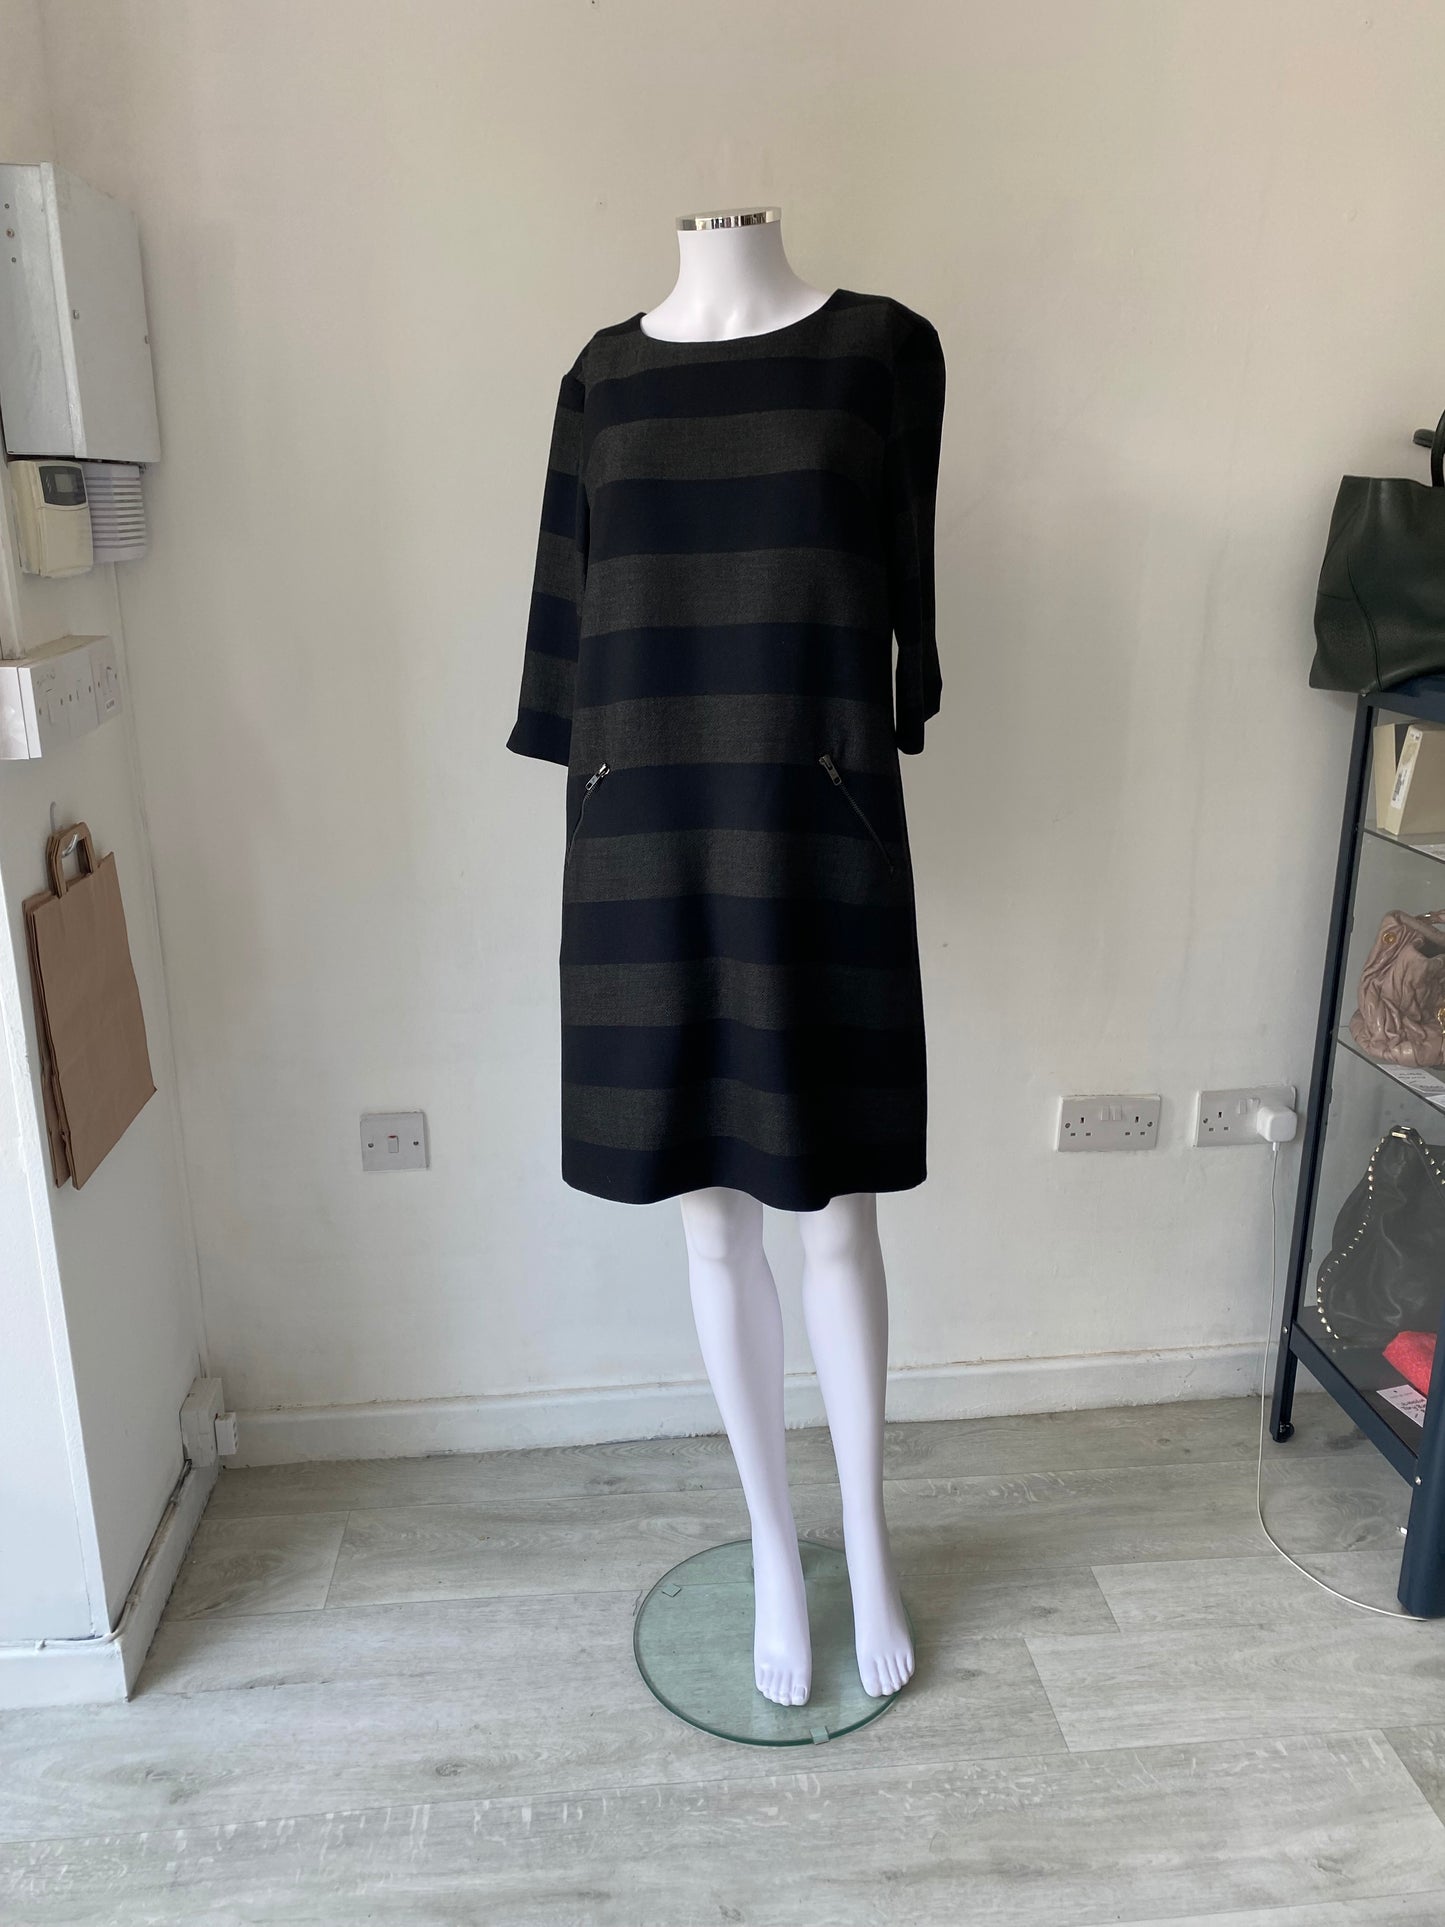 Phase Eight Grey and Black Striped Dress Size 12